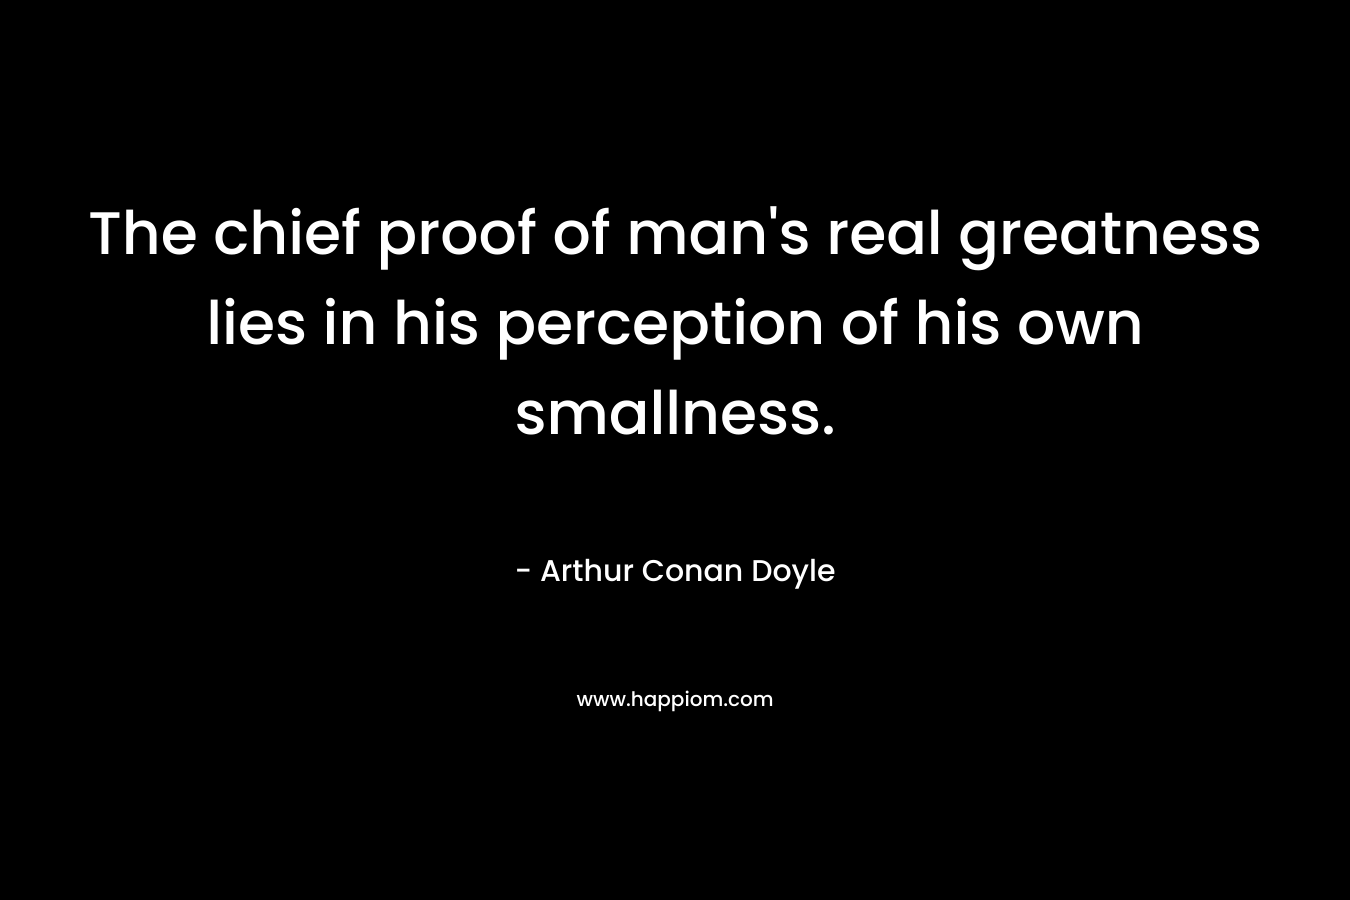 The chief proof of man’s real greatness lies in his perception of his own smallness. – Arthur Conan Doyle